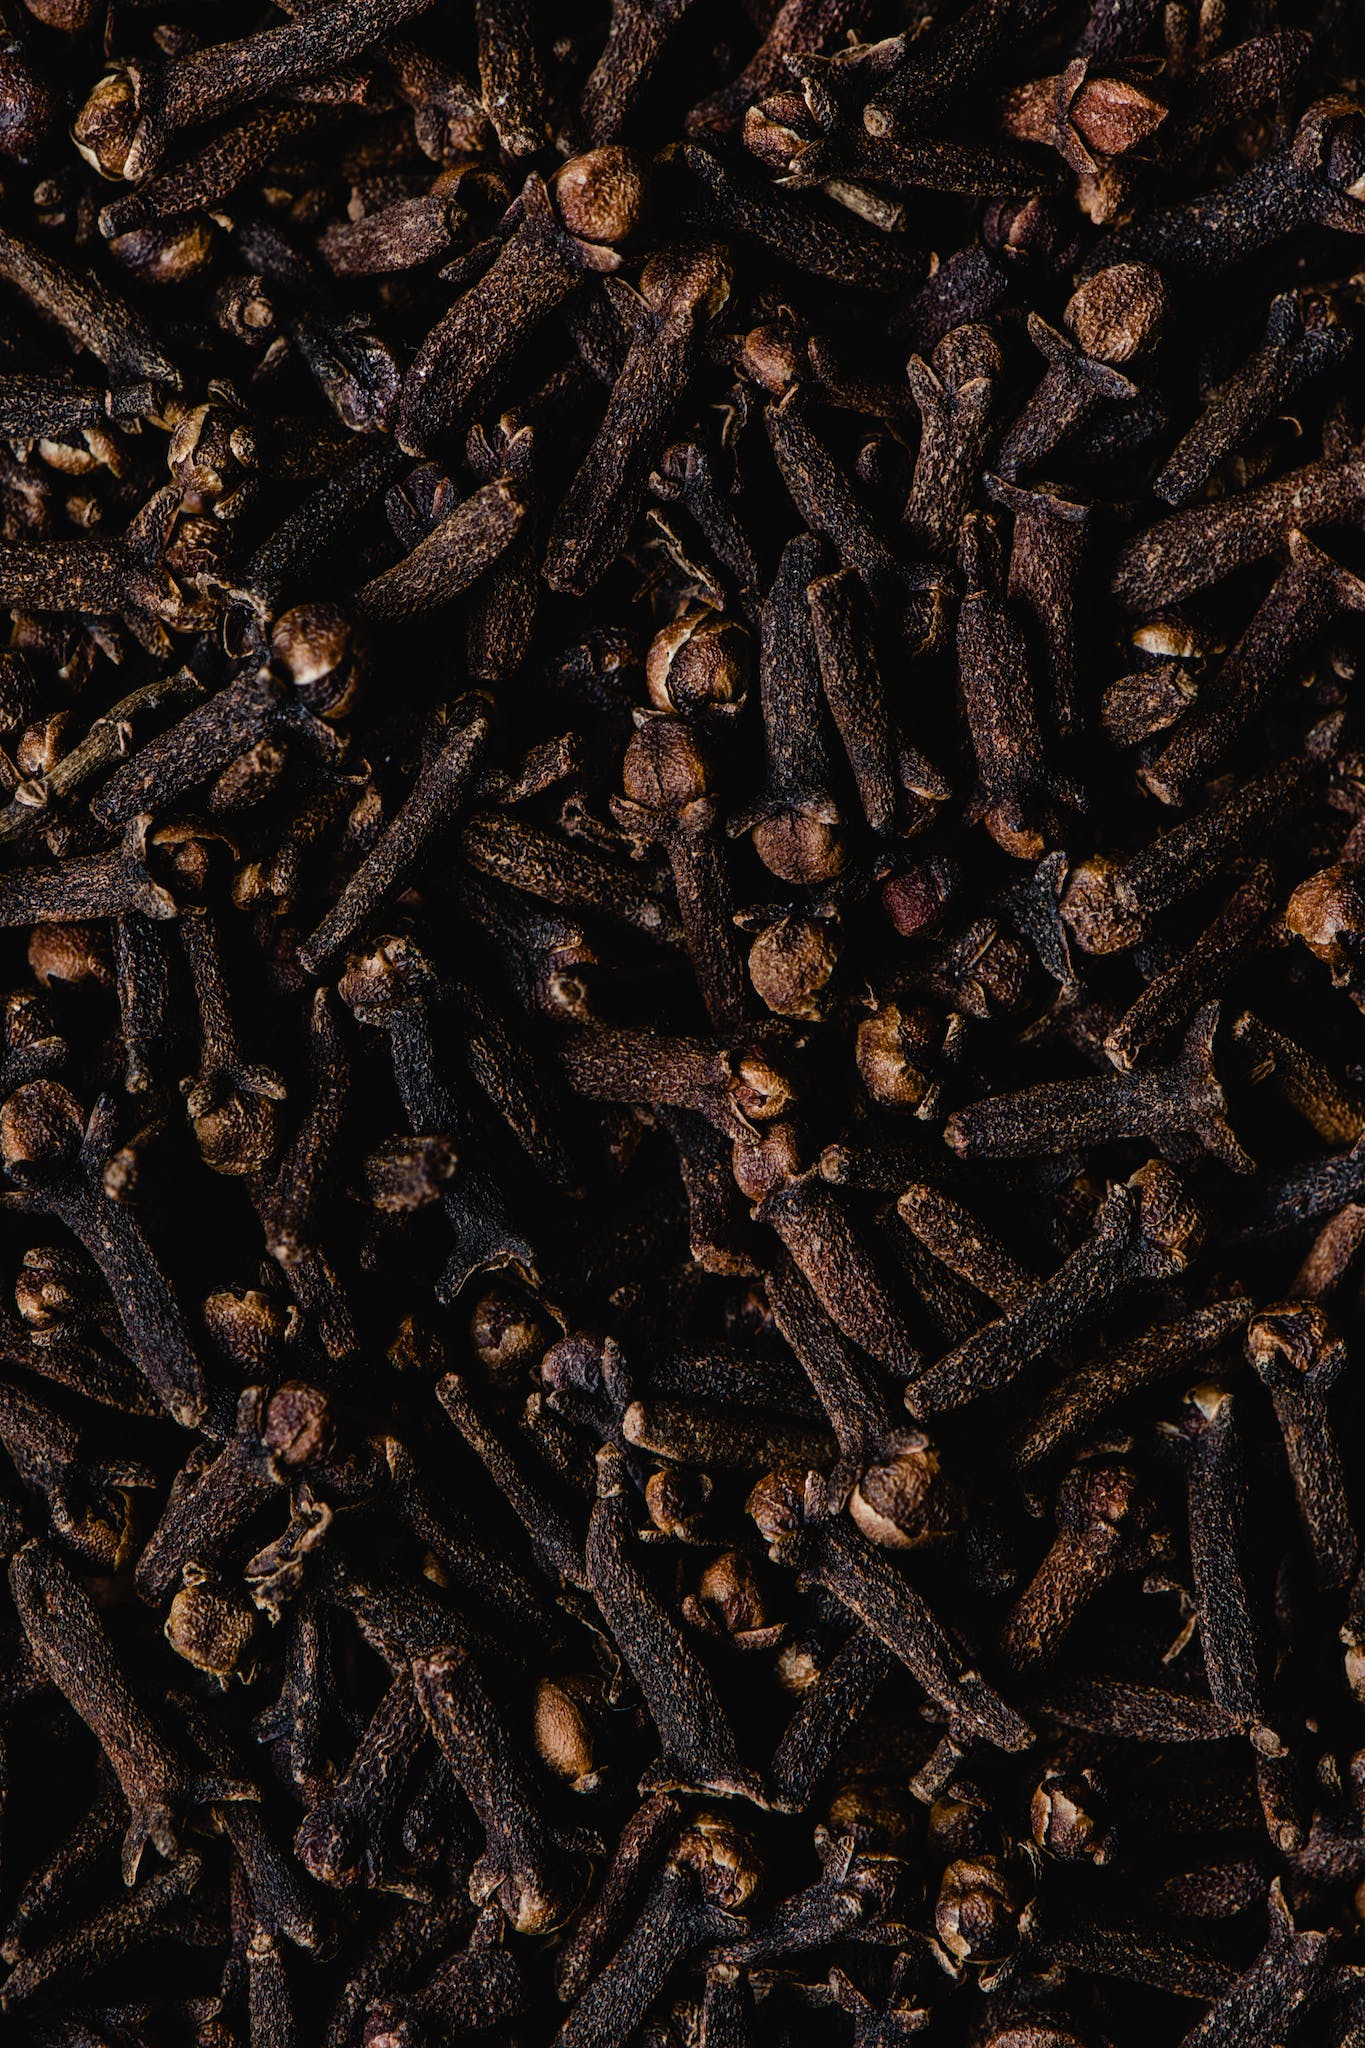 Dried Cloves in Close-up Shot